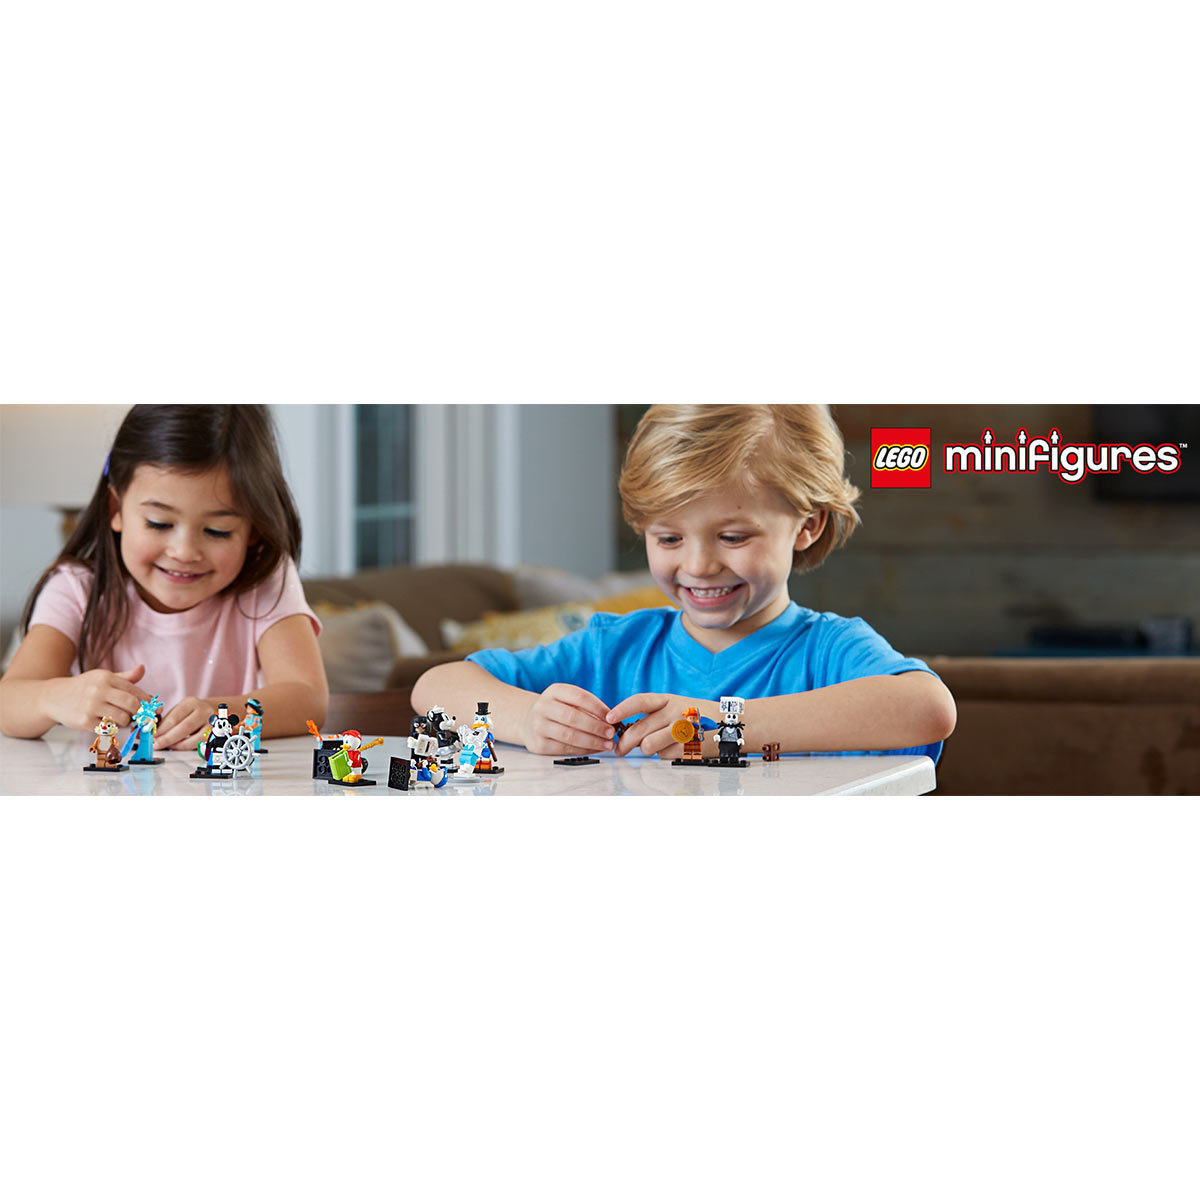 Lifestyle image of children playing with the LEGO disney minifigures